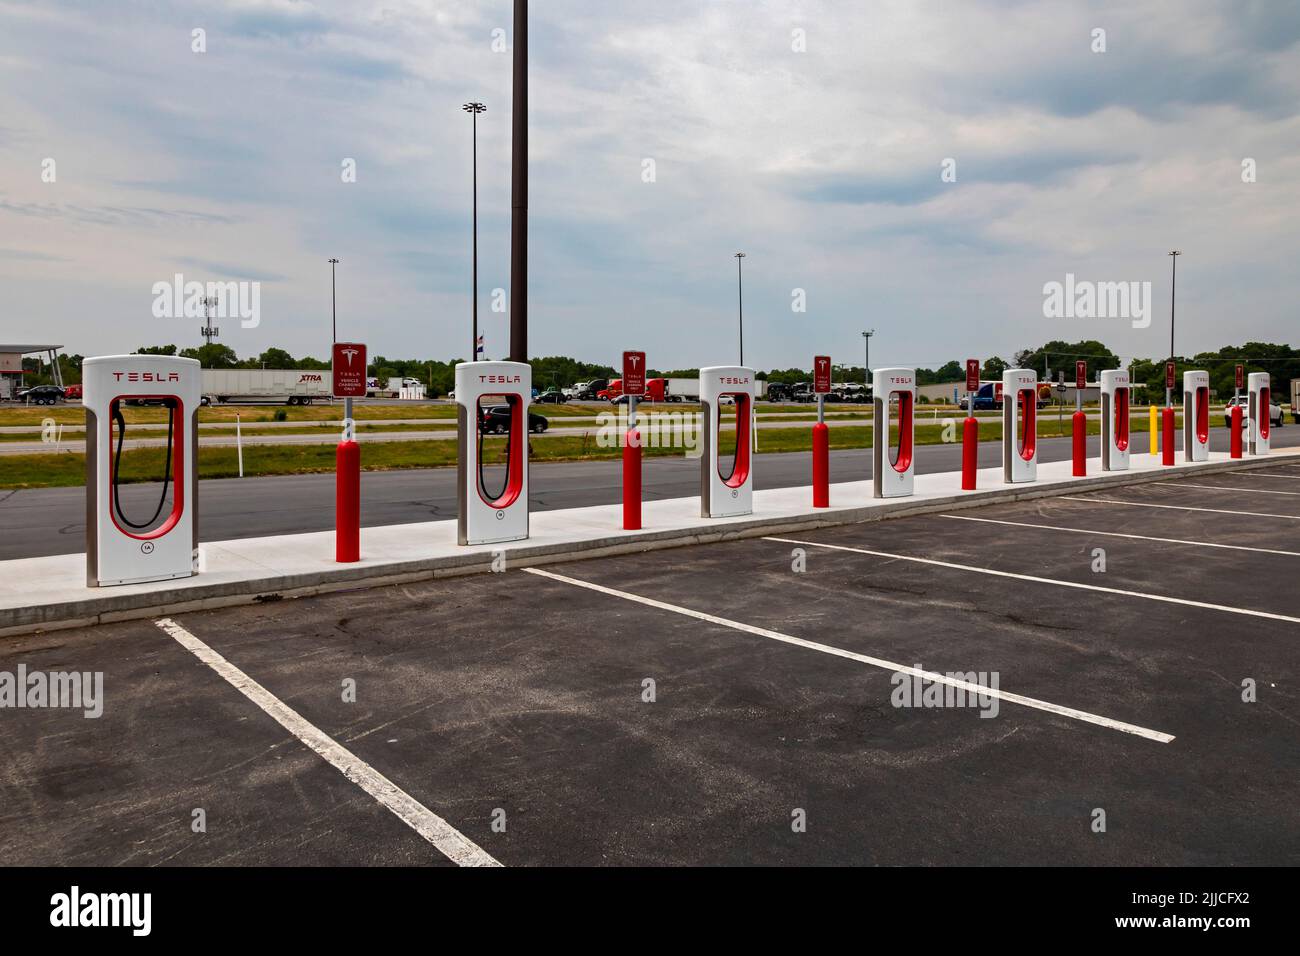 Elkhart, Indiana - Charging stations for Tesla electric vehicles at a rest area on the Indiana Toll Road. Stock Photo